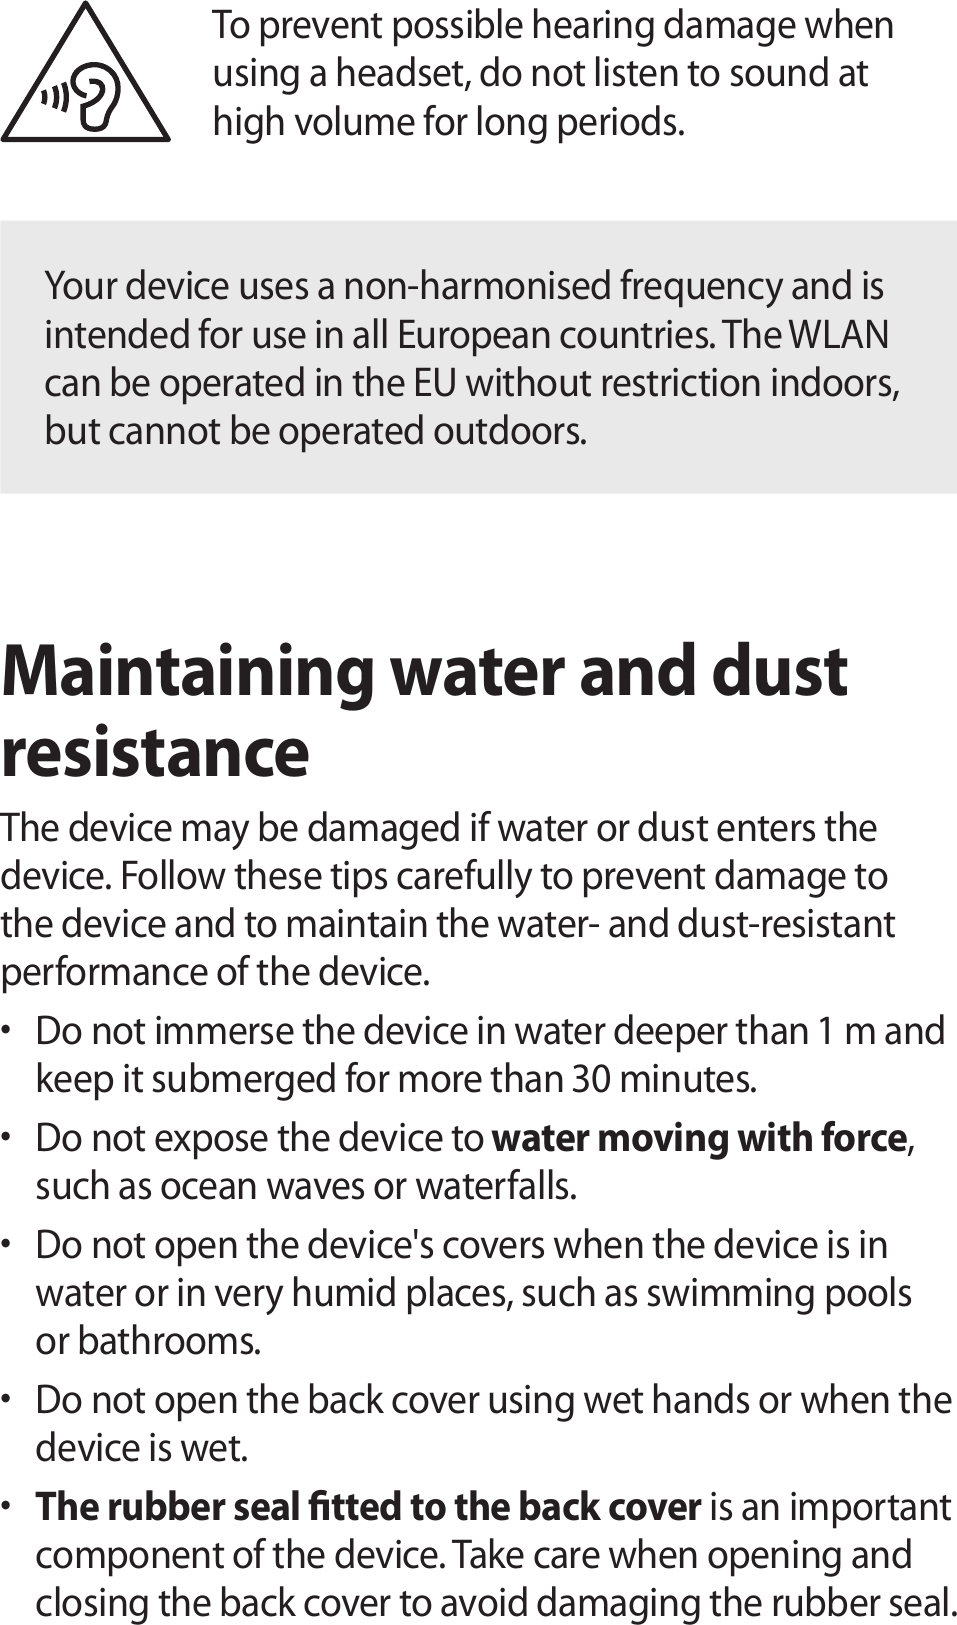 To prevent possible hearing damage when using a headset, do not listen to sound at high volume for long periods.Your device uses a non-harmonised frequency and is intended for use in all European countries. The WLAN can be operated in the EU without restriction indoors, but cannot be operated outdoors.Maintaining water and dust resistanceThe device may be damaged if water or dust enters the device. Follow these tips carefully to prevent damage to the device and to maintain the water- and dust-resistant performance of the device.• Do not immerse the device in water deeper than 1 m and keep it submerged for more than 30 minutes.• Do not expose the device to water moving with force, such as ocean waves or waterfalls.• Do not open the device&apos;s covers when the device is in water or in very humid places, such as swimming pools or bathrooms.• Do not open the back cover using wet hands or when the device is wet.• The rubber seal tted to the back cover is an important component of the device. Take care when opening and closing the back cover to avoid damaging the rubber seal. 